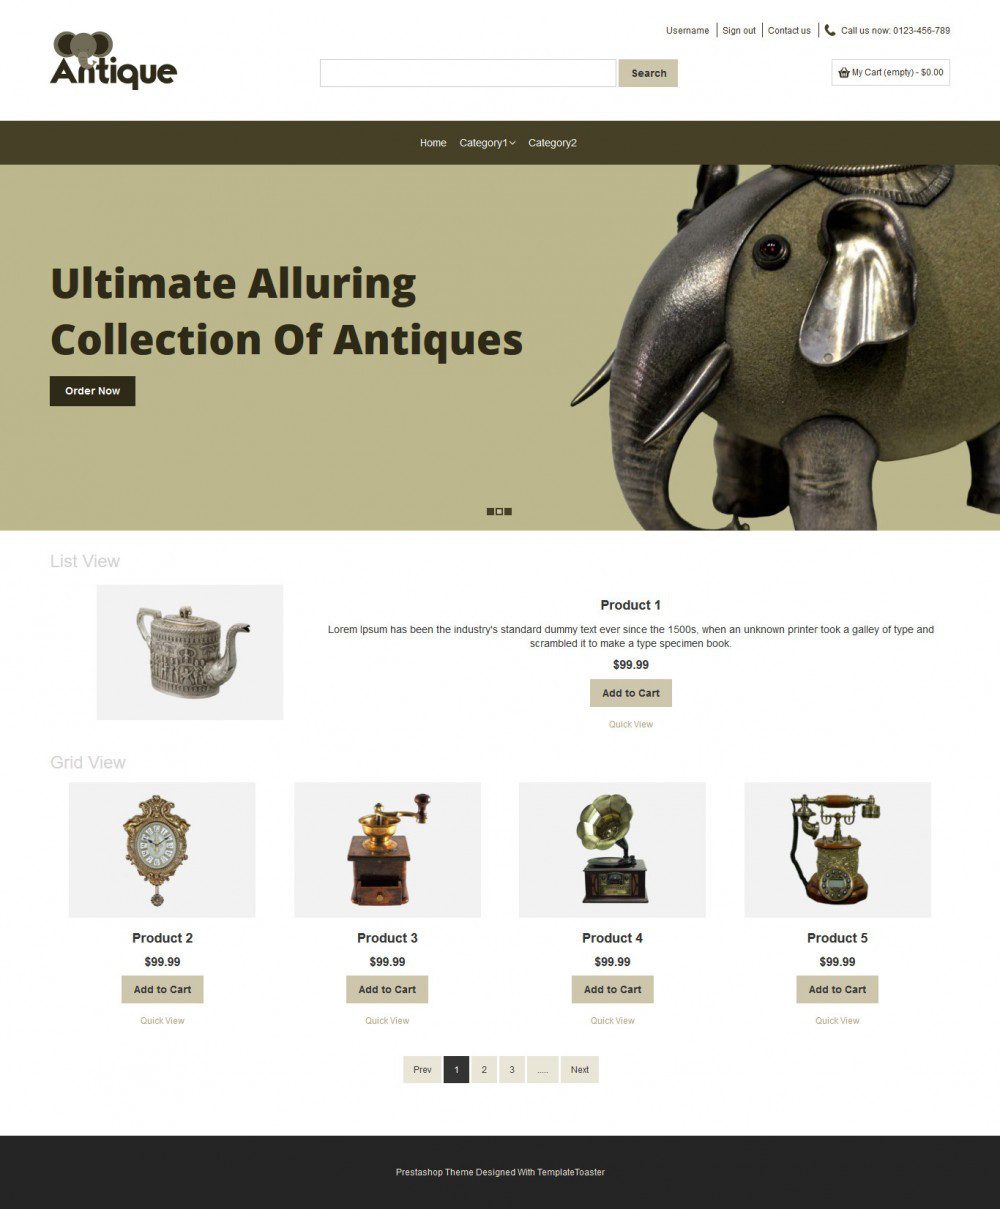 Antique Old Products OpenCart Theme